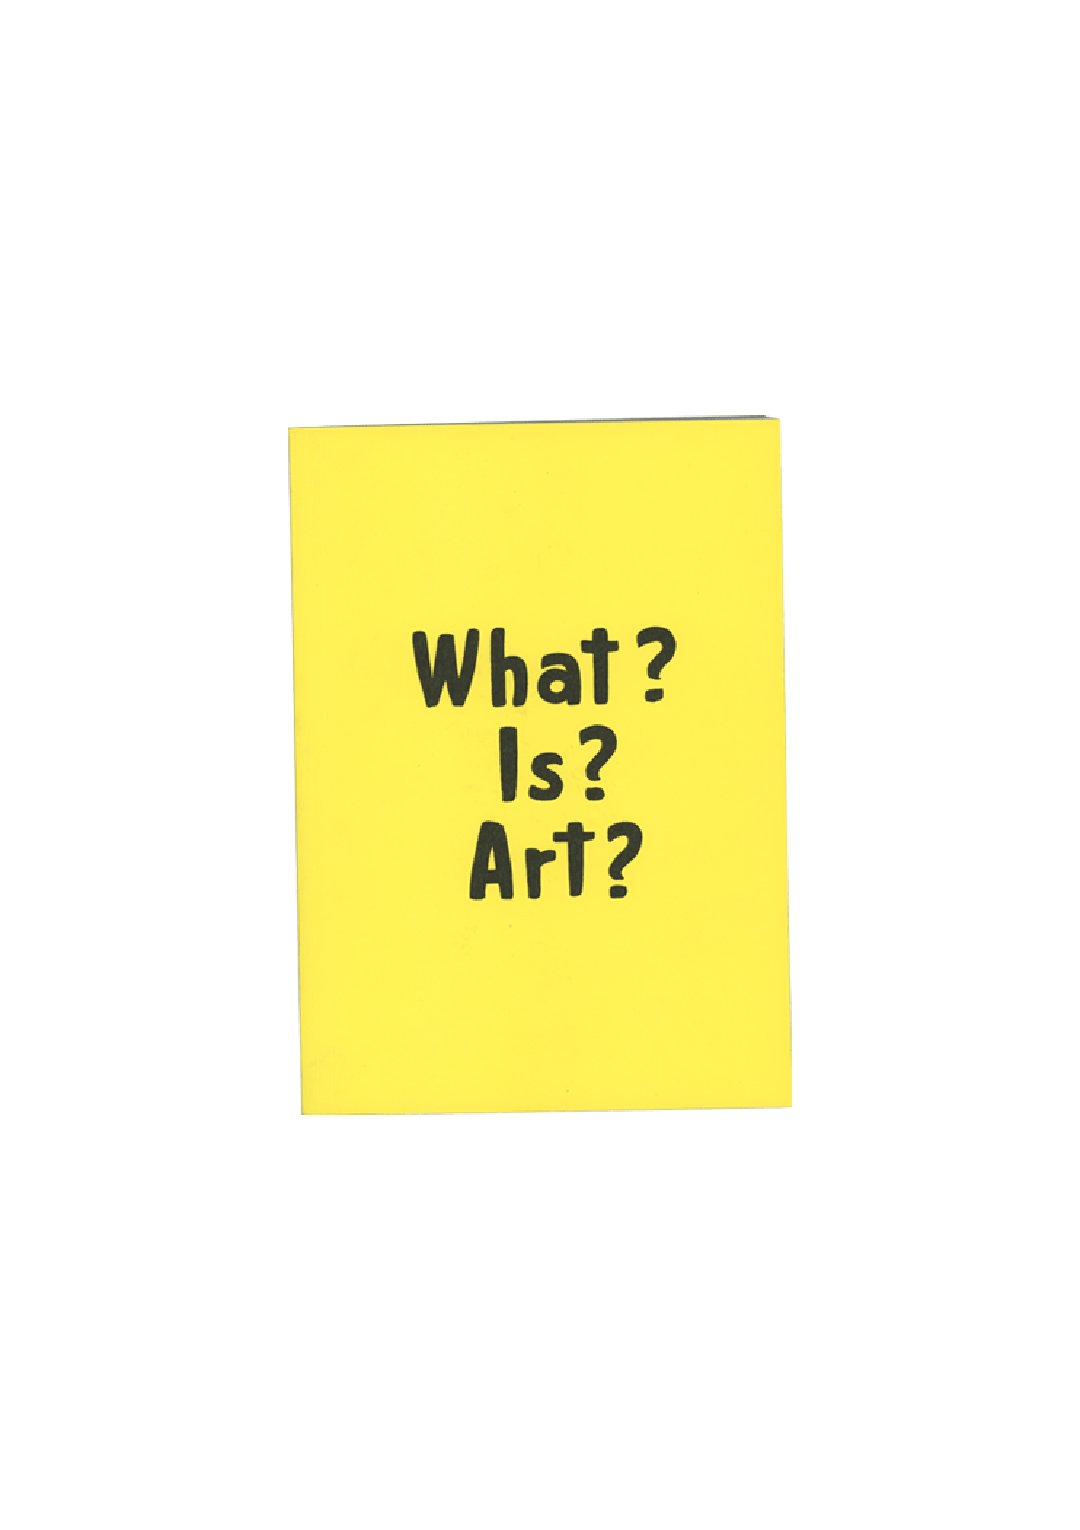 What? Is? Art?